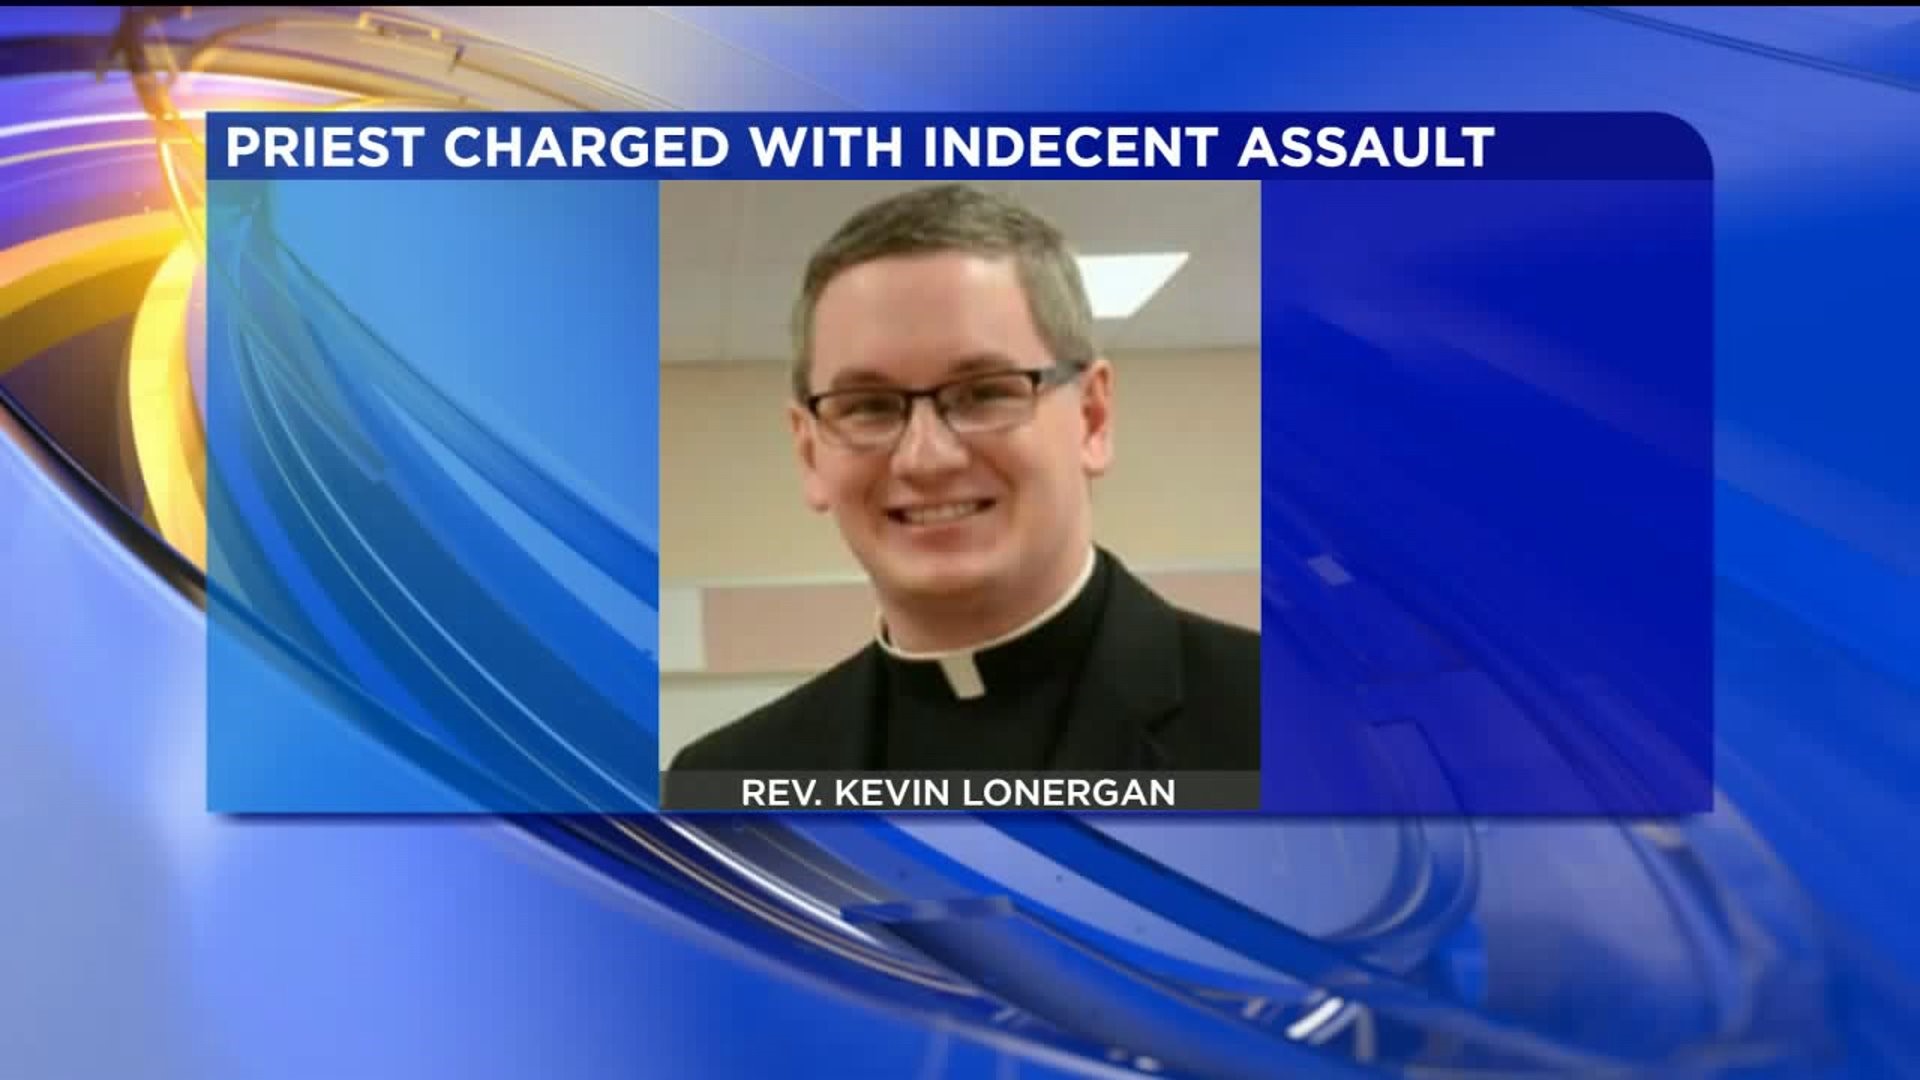 Priest from Pottsville Accused of Indecent Assault